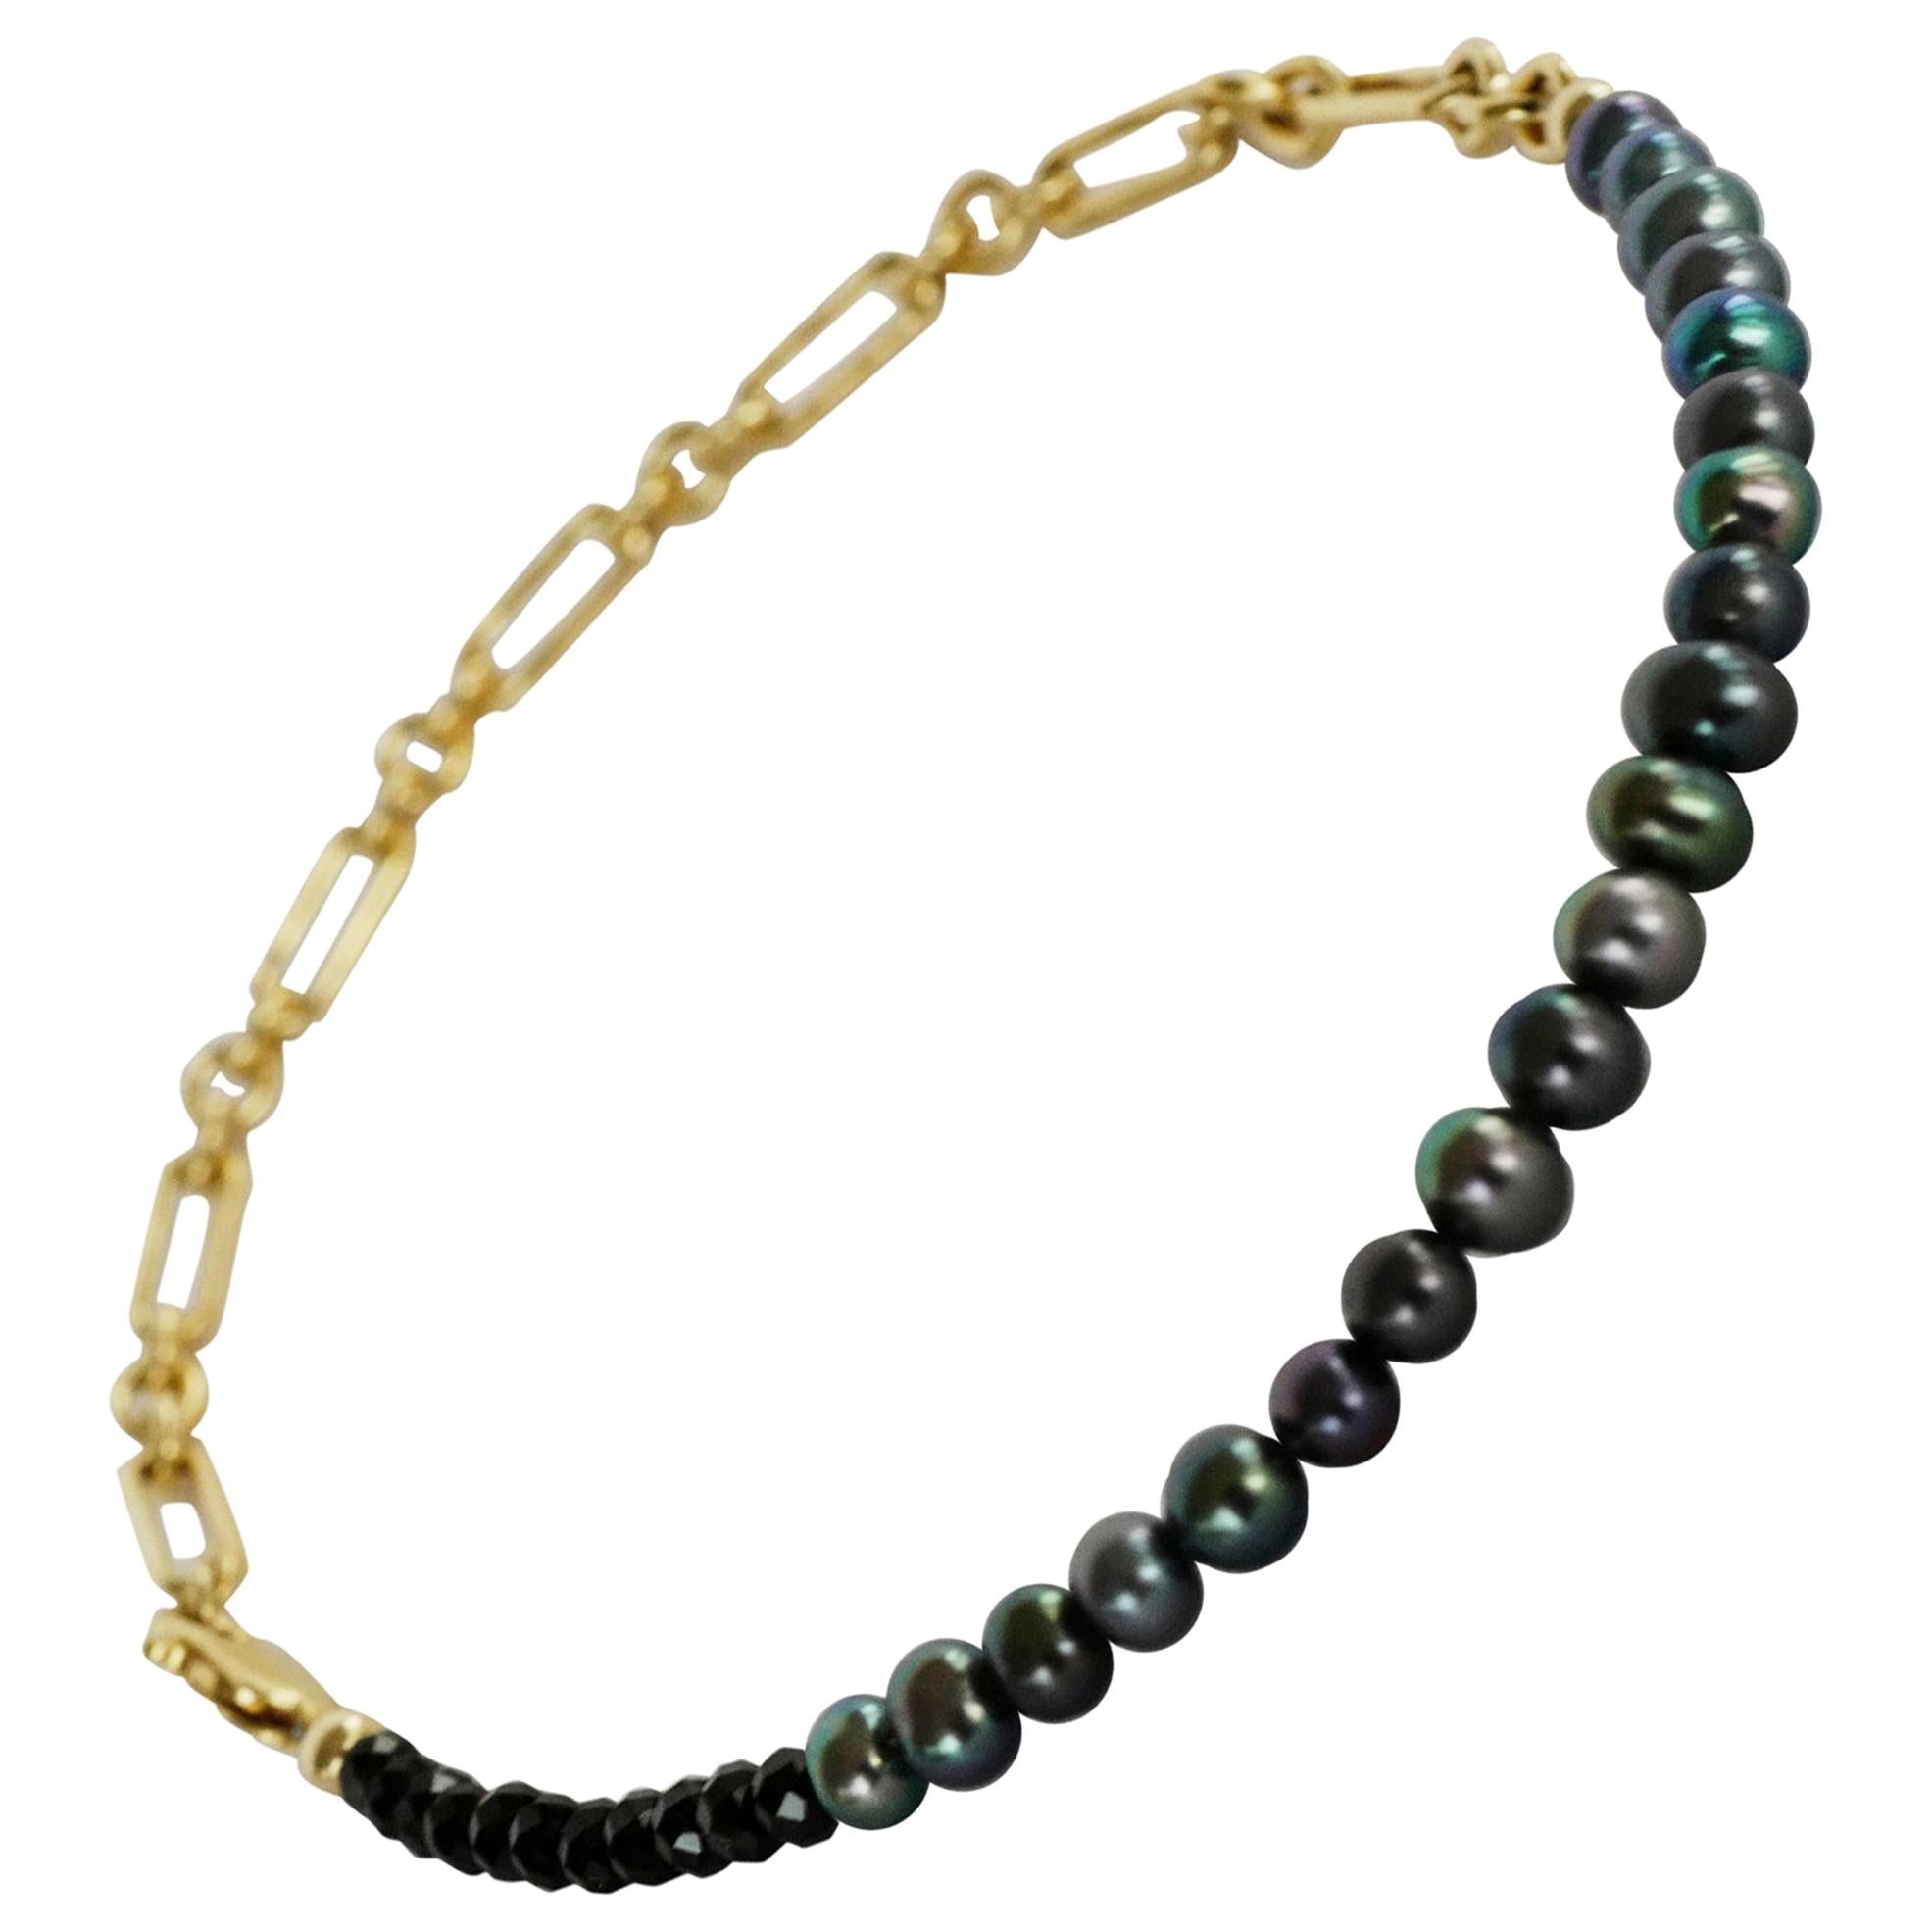 Ankle Bracelet Beaded Black Pearl Spinel Gold Filled Chain J Dauphin For Sale